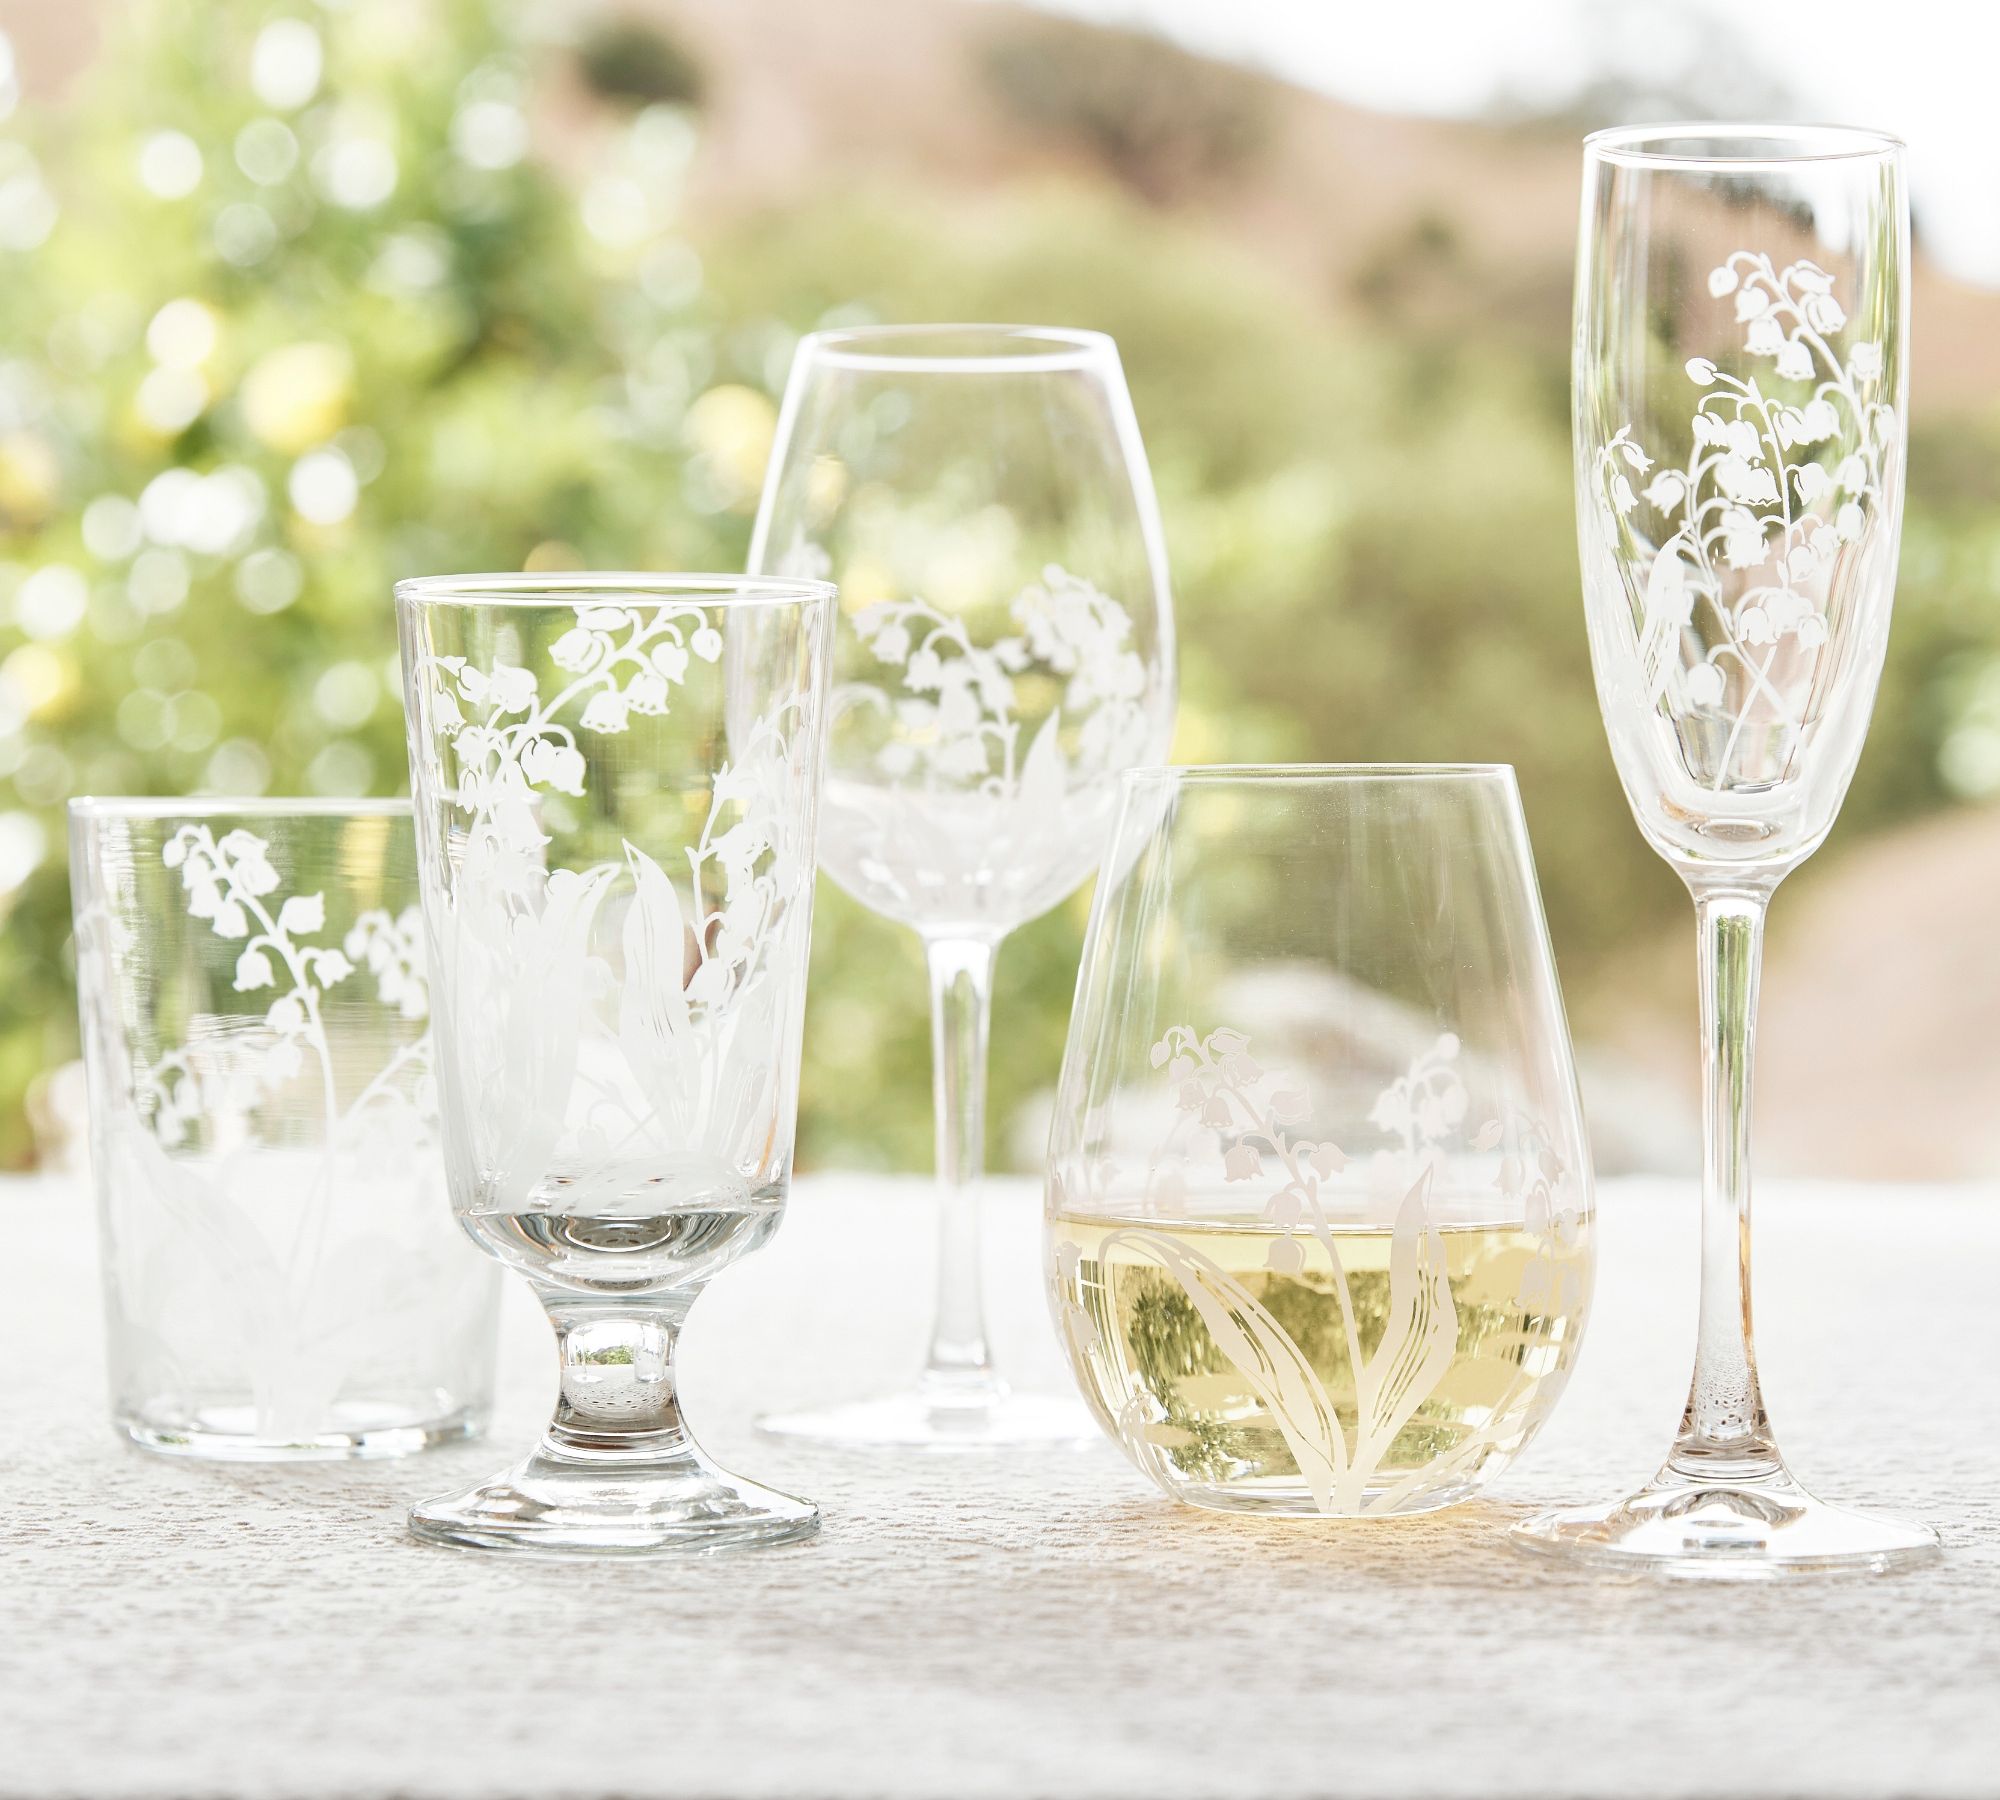 Monique Lhuillier Lily of the Valley Glassware Collection